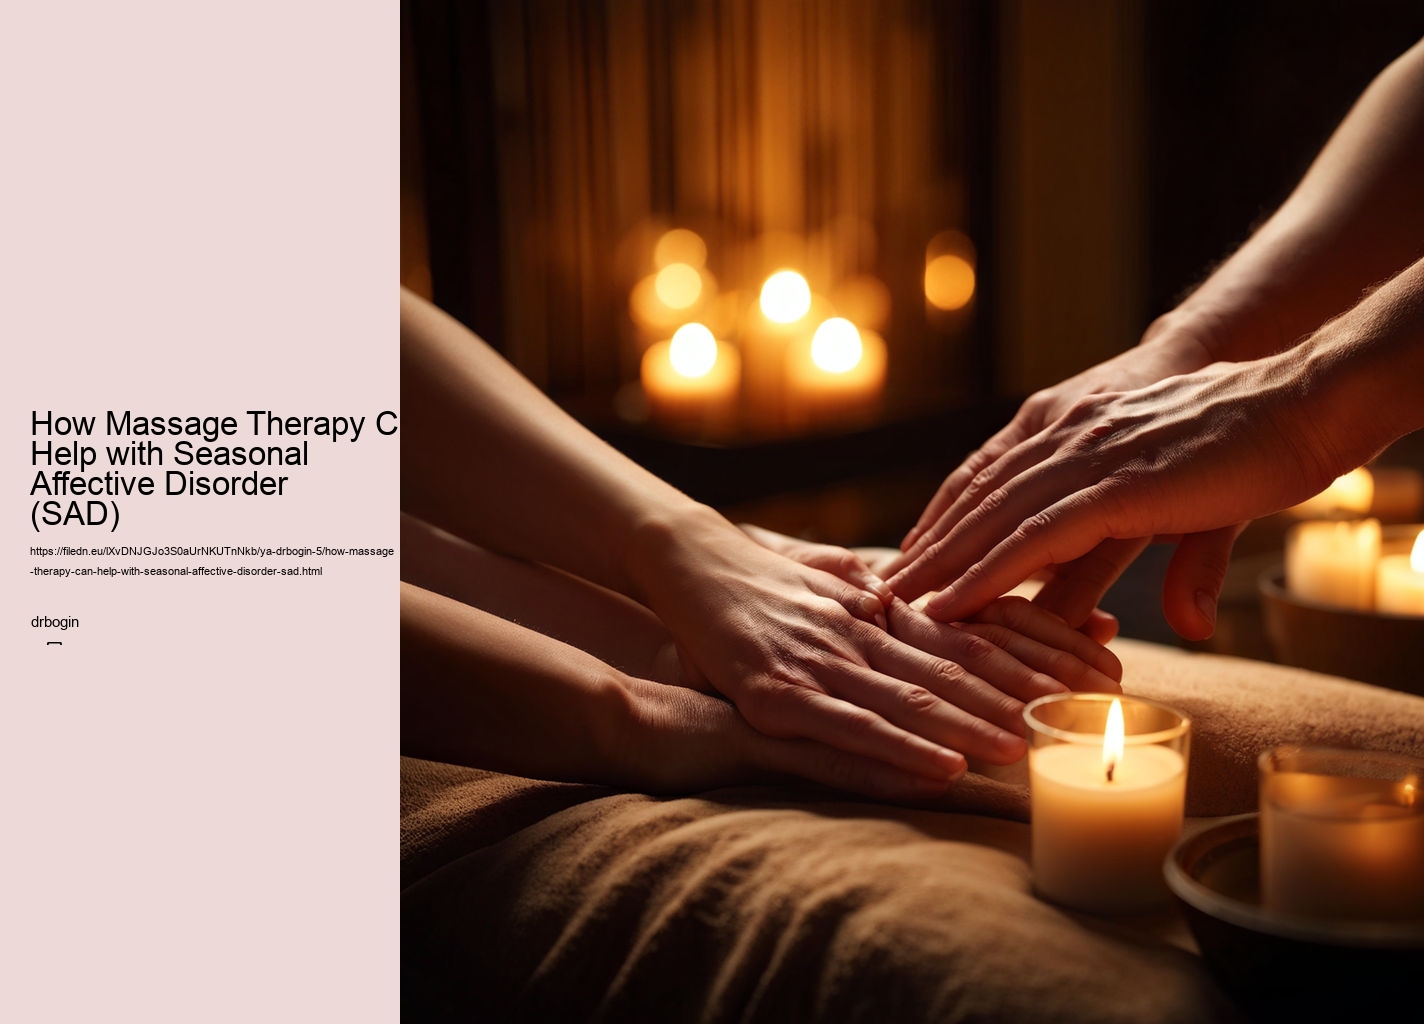 How Massage Therapy Can Help with Seasonal Affective Disorder (SAD)